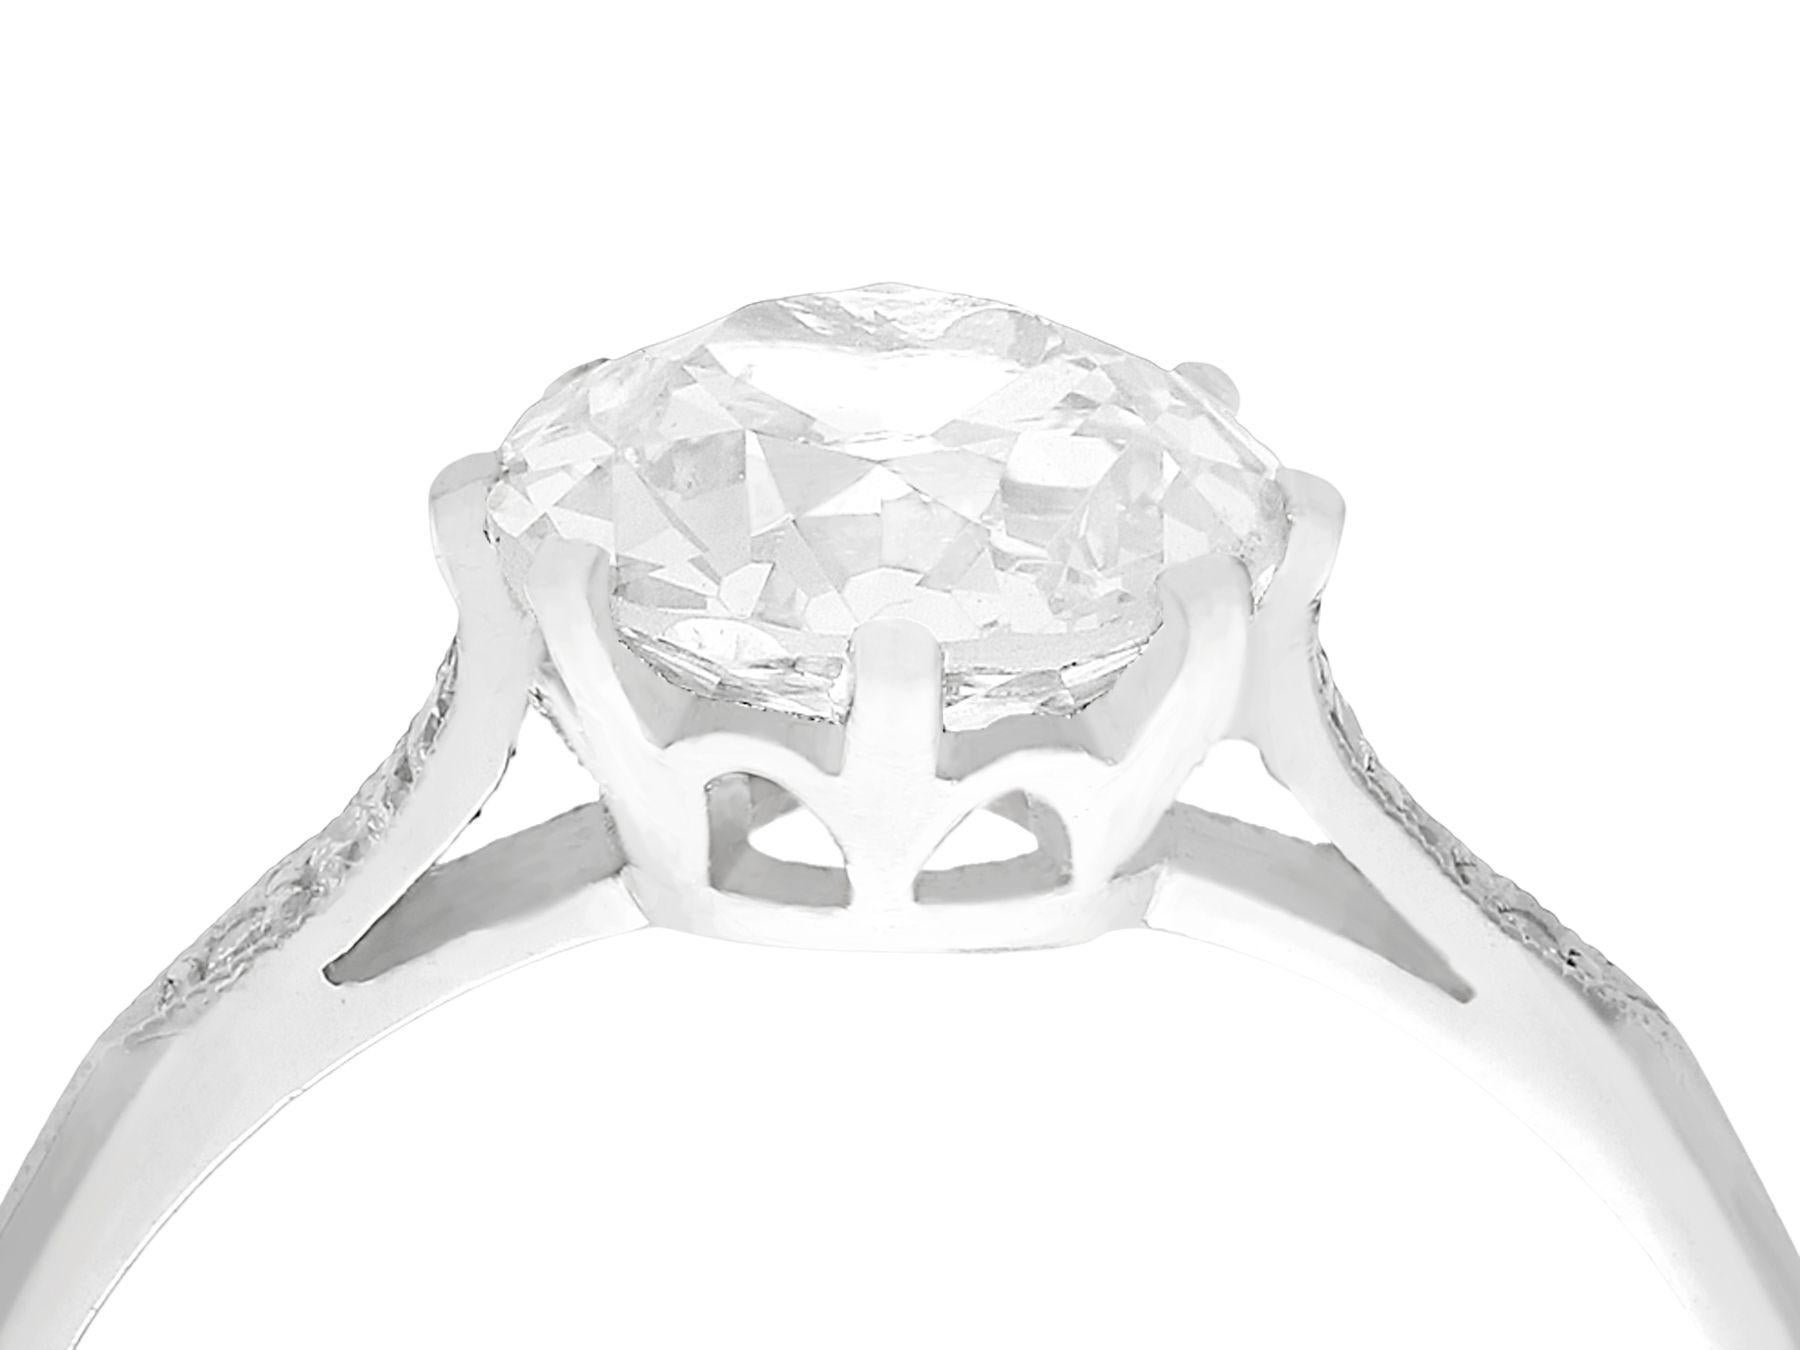 An impressive antique 1.55 carat diamond and platinum solitaire style engagement ring; part of our diverse antique jewelry collections.

This fine and impressive antique has been crafted in platinum.

The pierced decorated eight claw setting